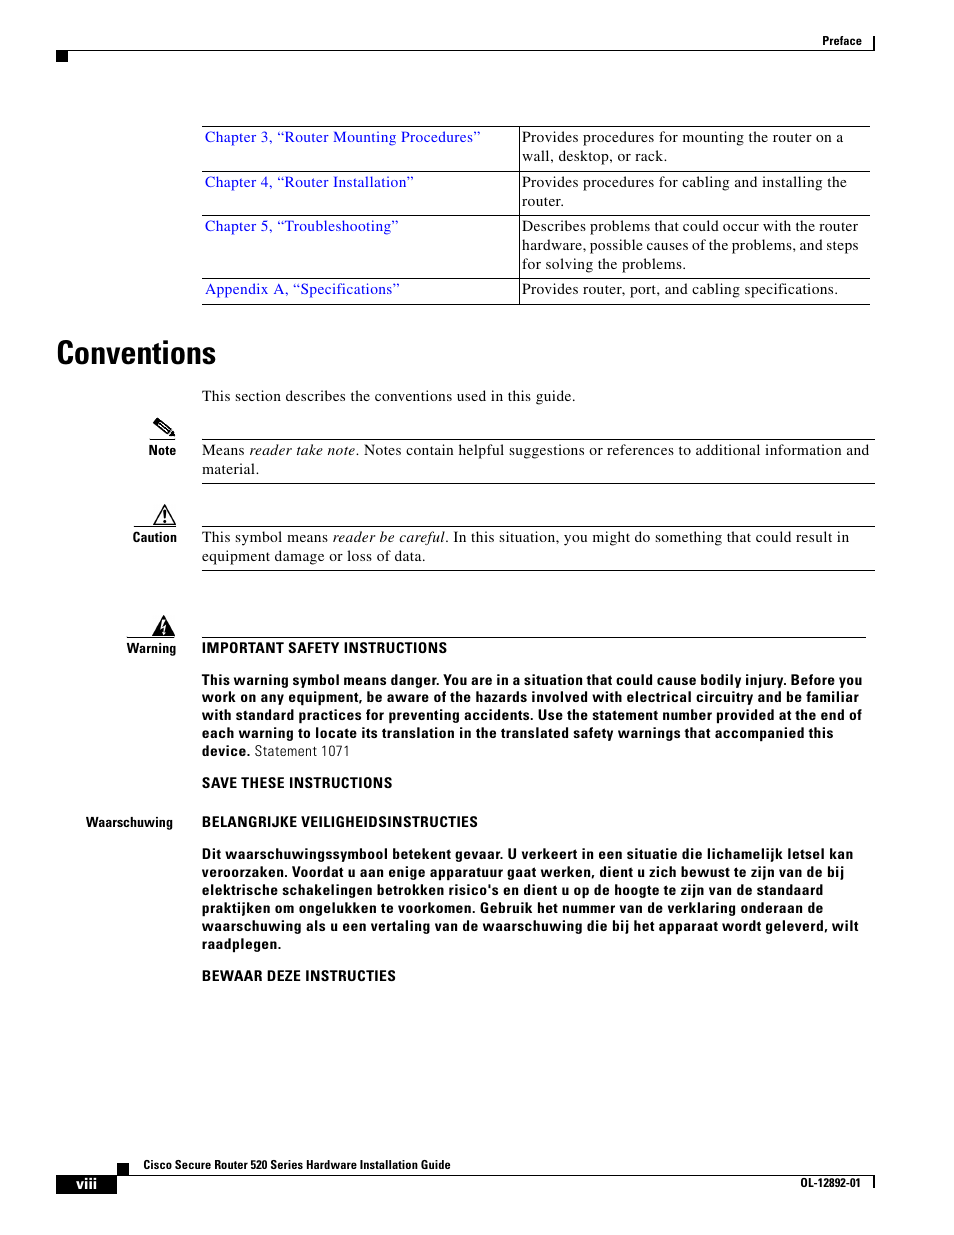 Conventions | Cisco 520 User Manual | Page 8 / 64